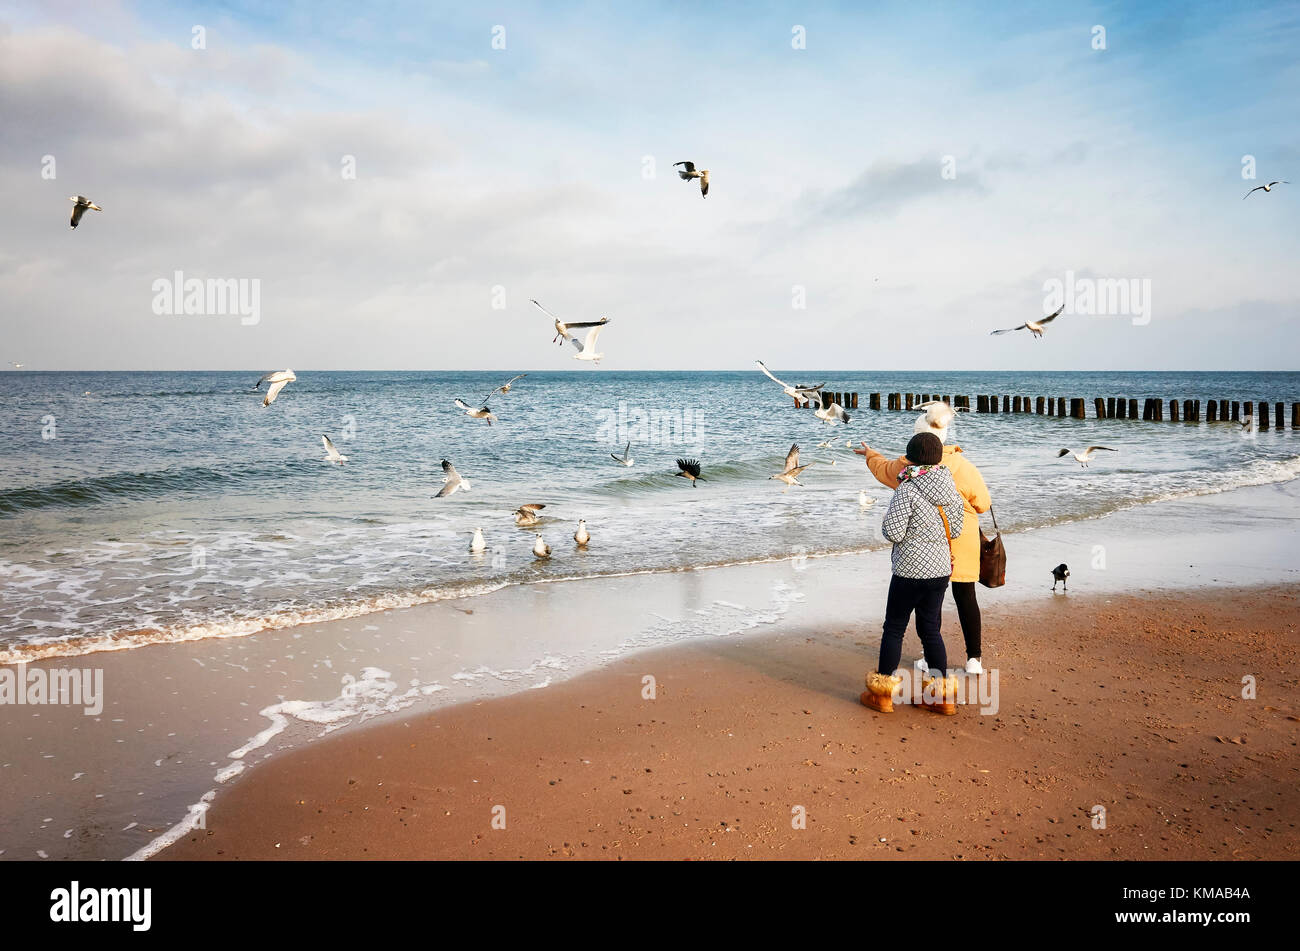 Dziwnowek, Poland - December 03, 2017: Two women feed birds at the beach on a cold day. Stock Photo